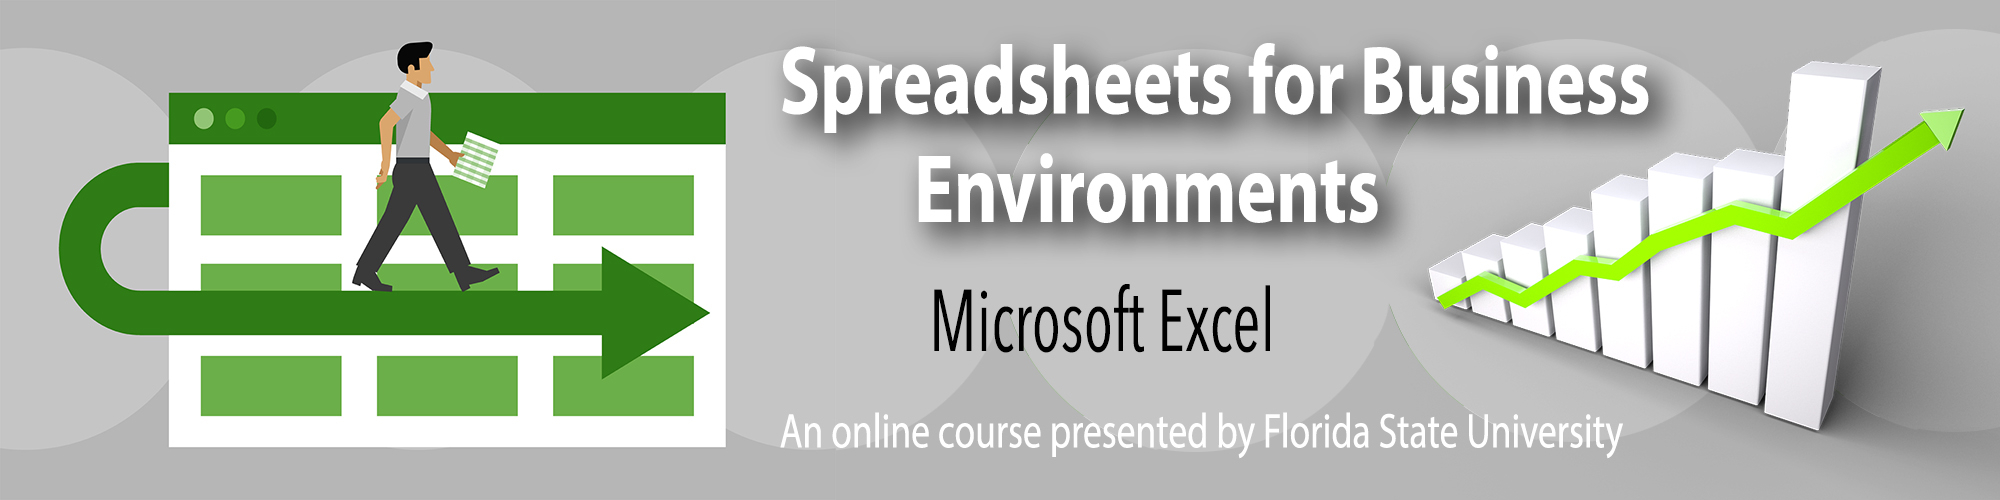 Spreadsheets For Business Environments | Florida State University in Spreadsheet Development